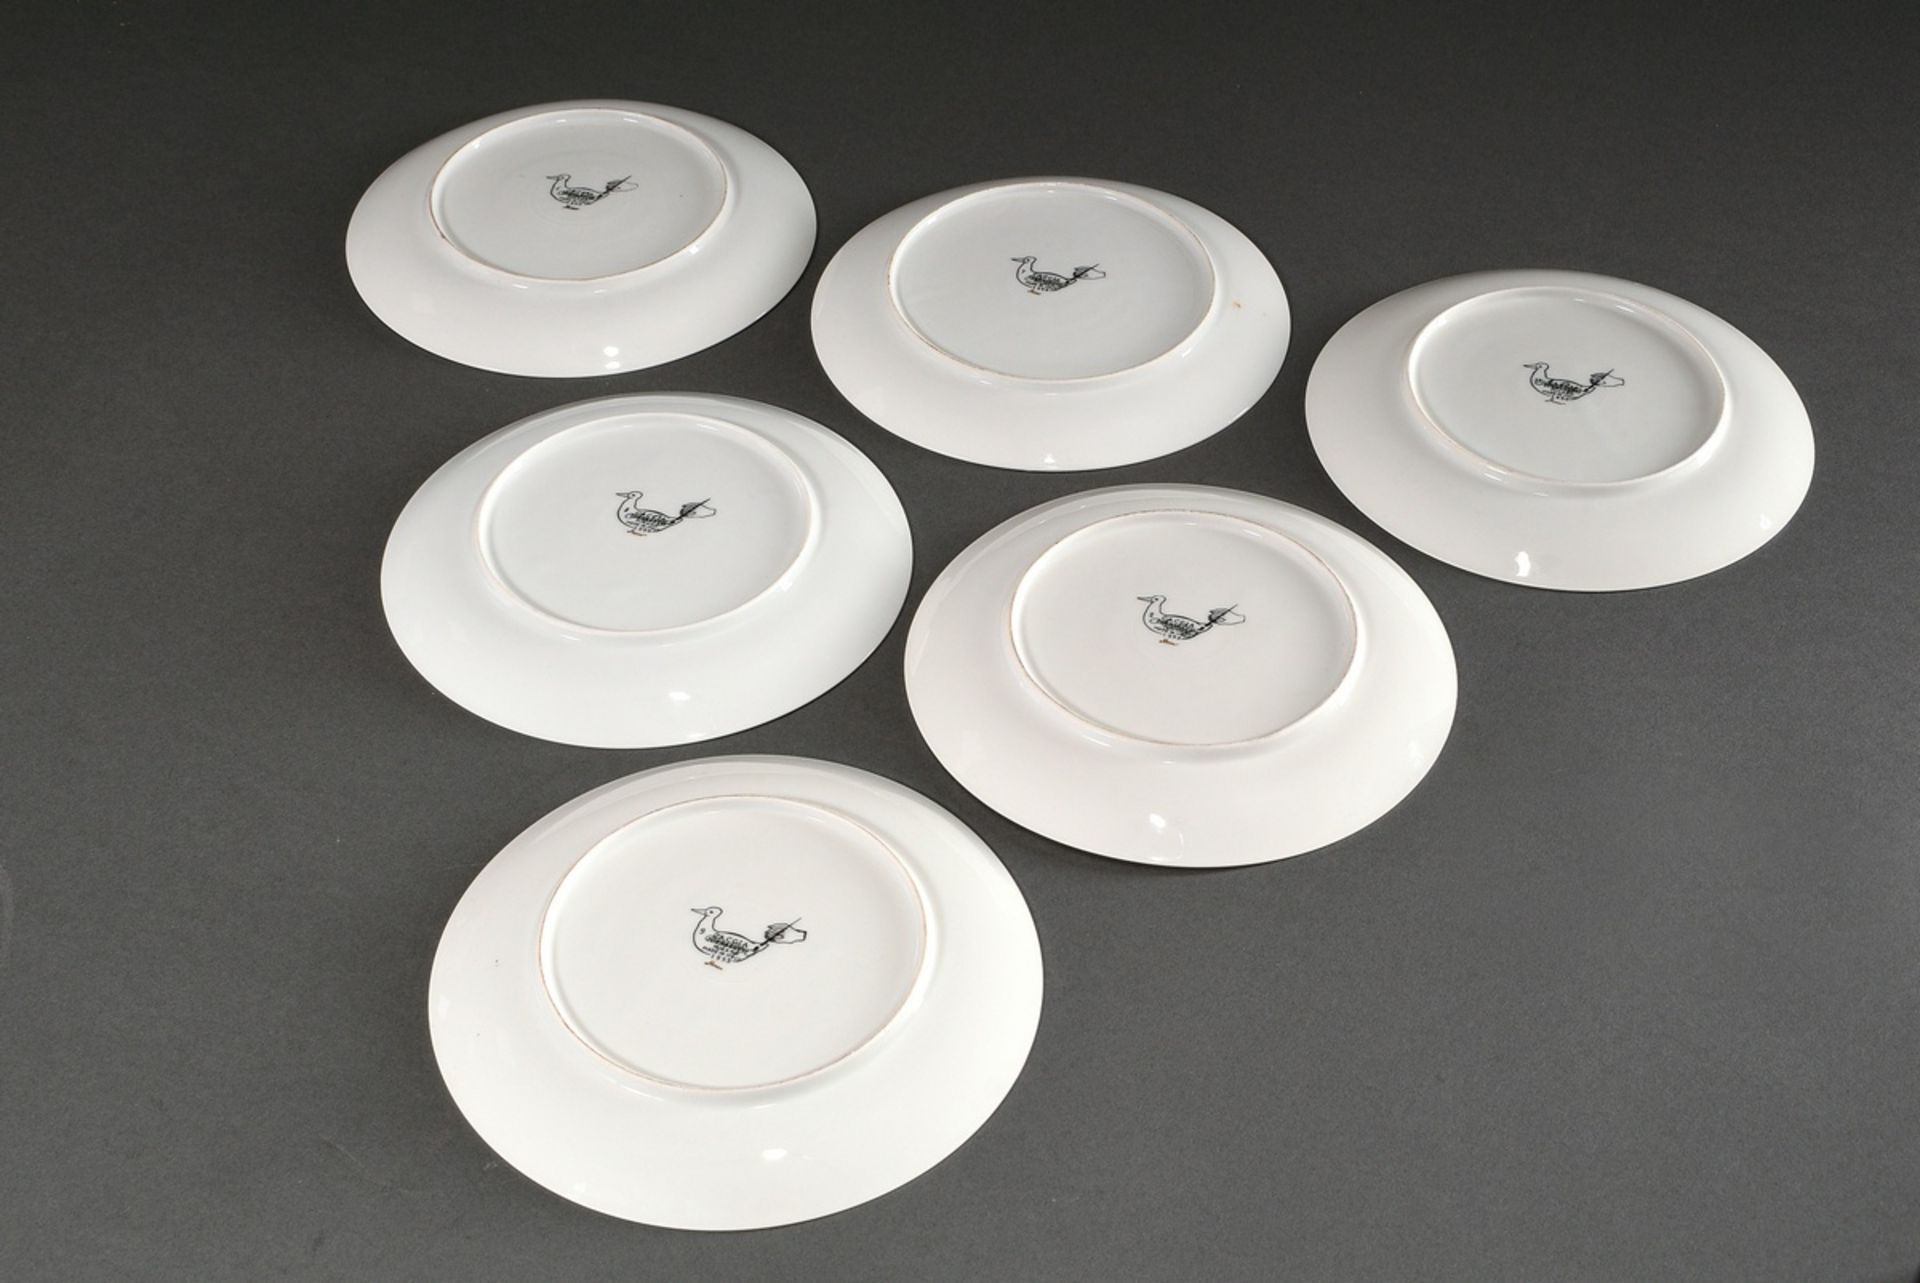 6 Fornasetti, Piero (1913-1988) plate with various sepia prints "bird motifs with hunting weapons"  - Image 5 of 10